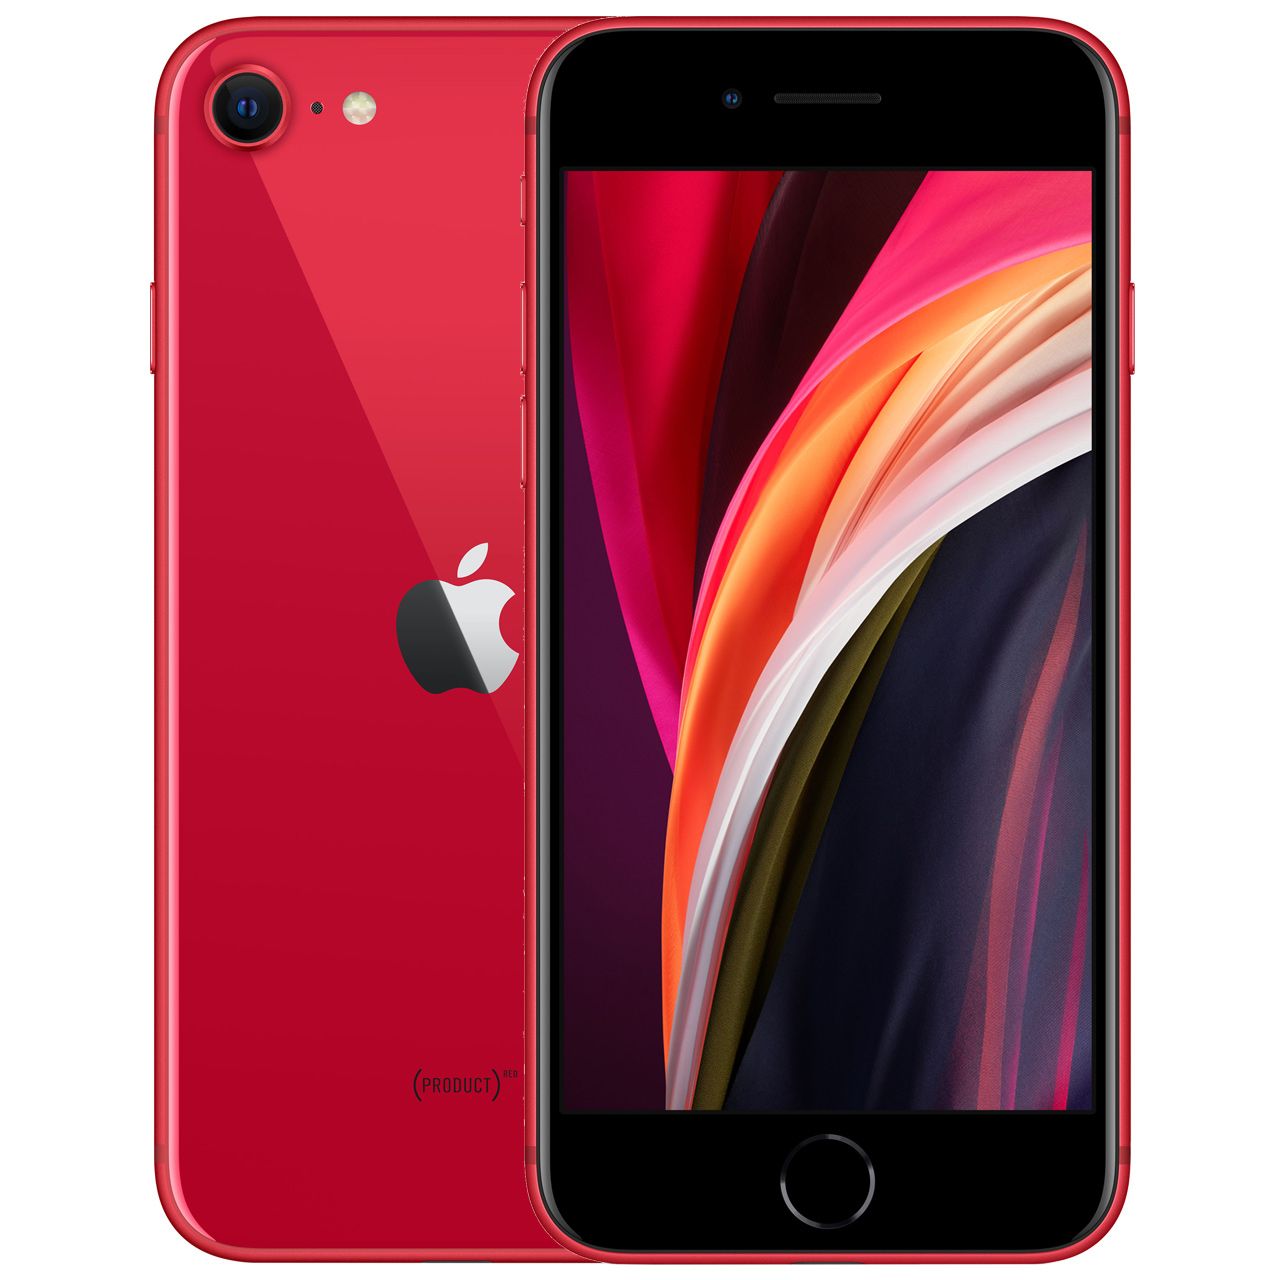 Apple iPhone SE 64GB in (PRODUCT) RED Review